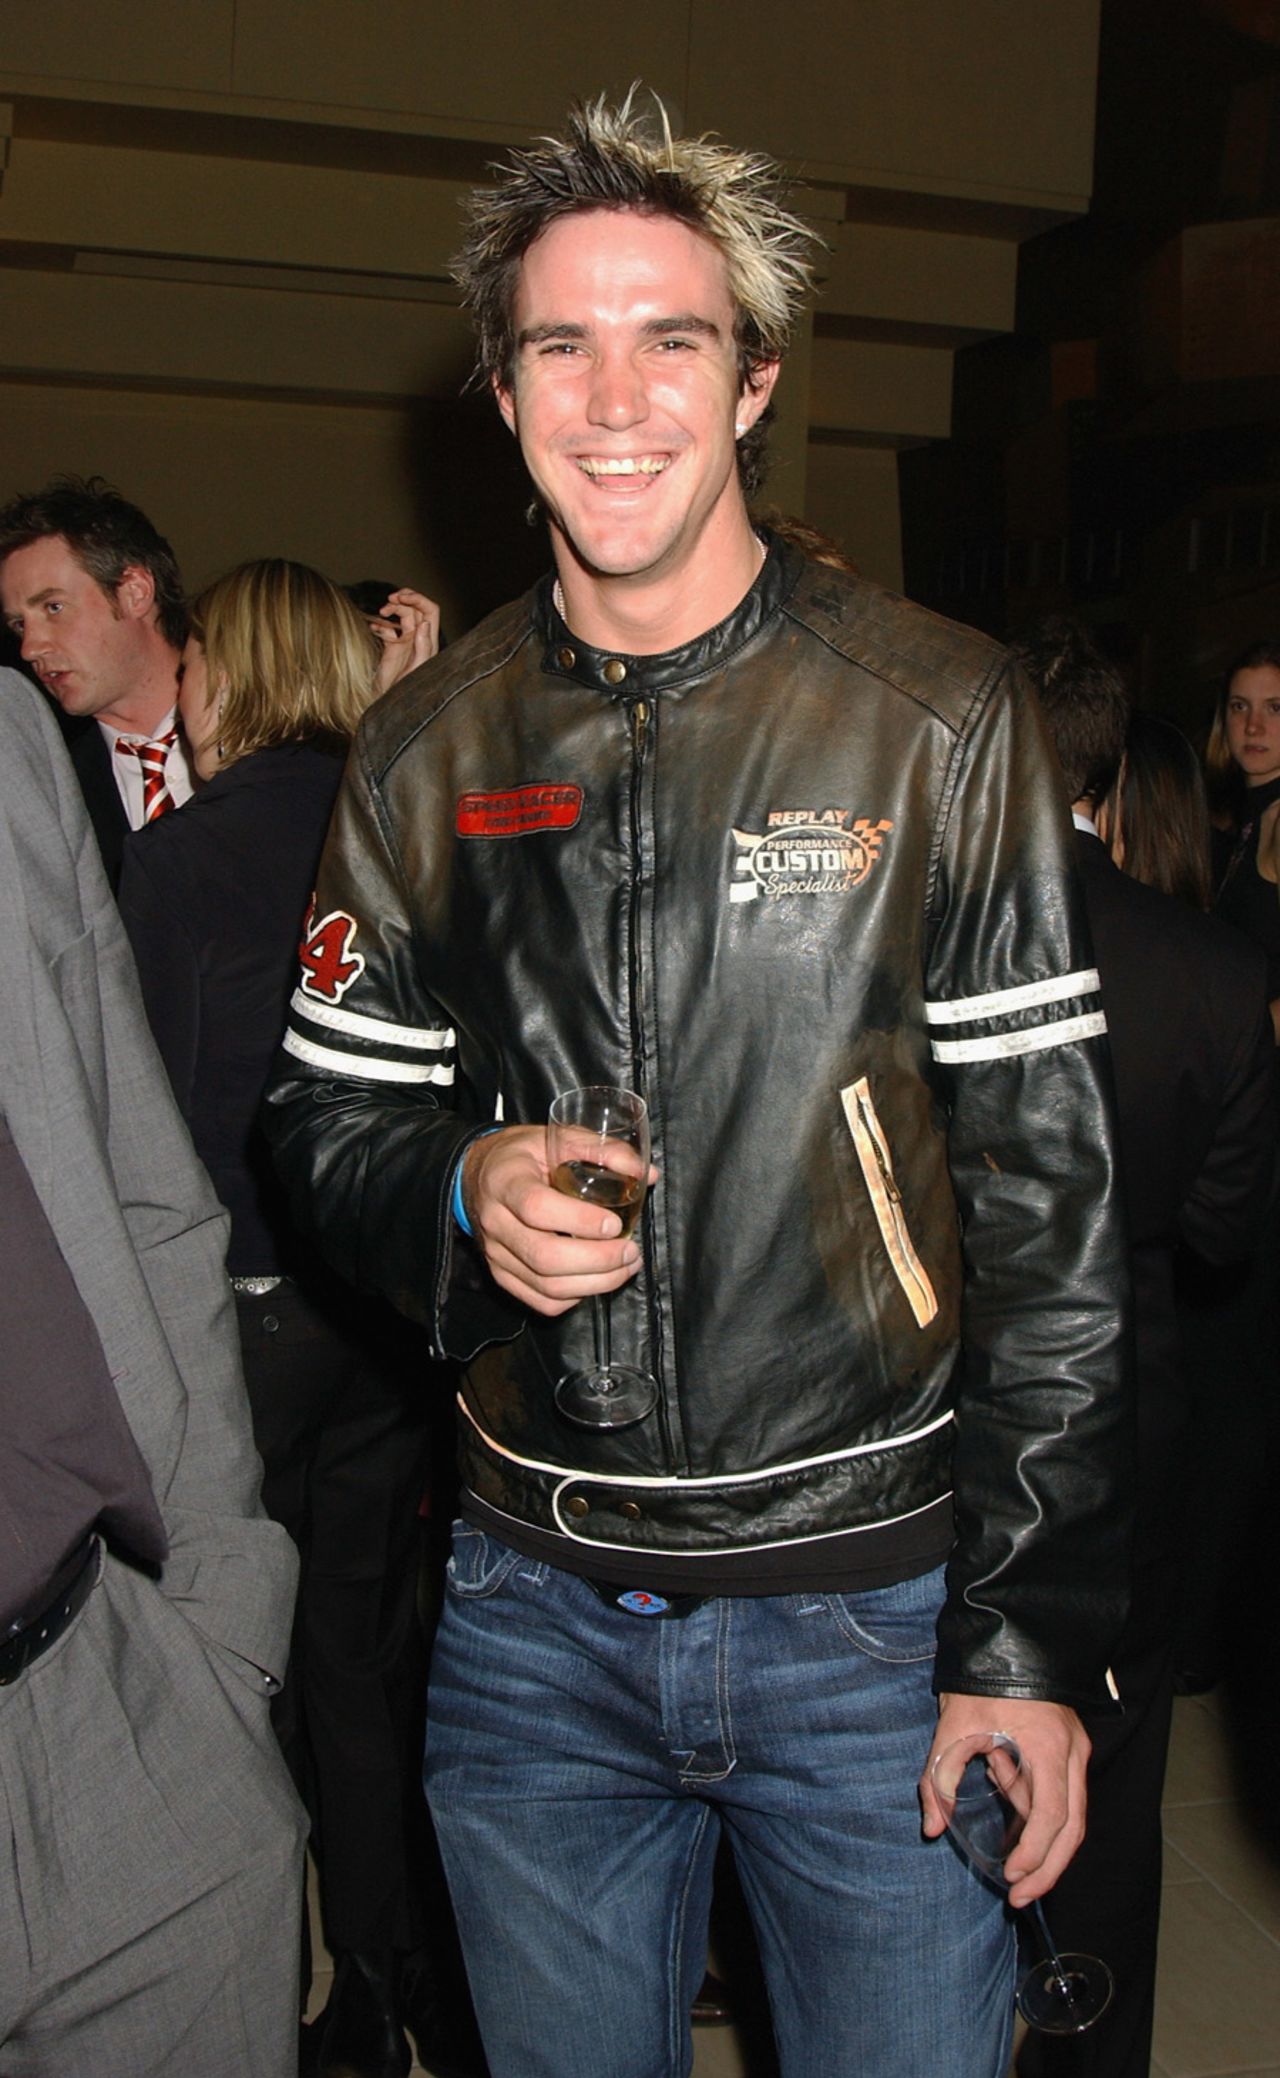 Kevin Pietersen at a party for the launch of Piers Morgan's memoirs, London, March 9, 2005